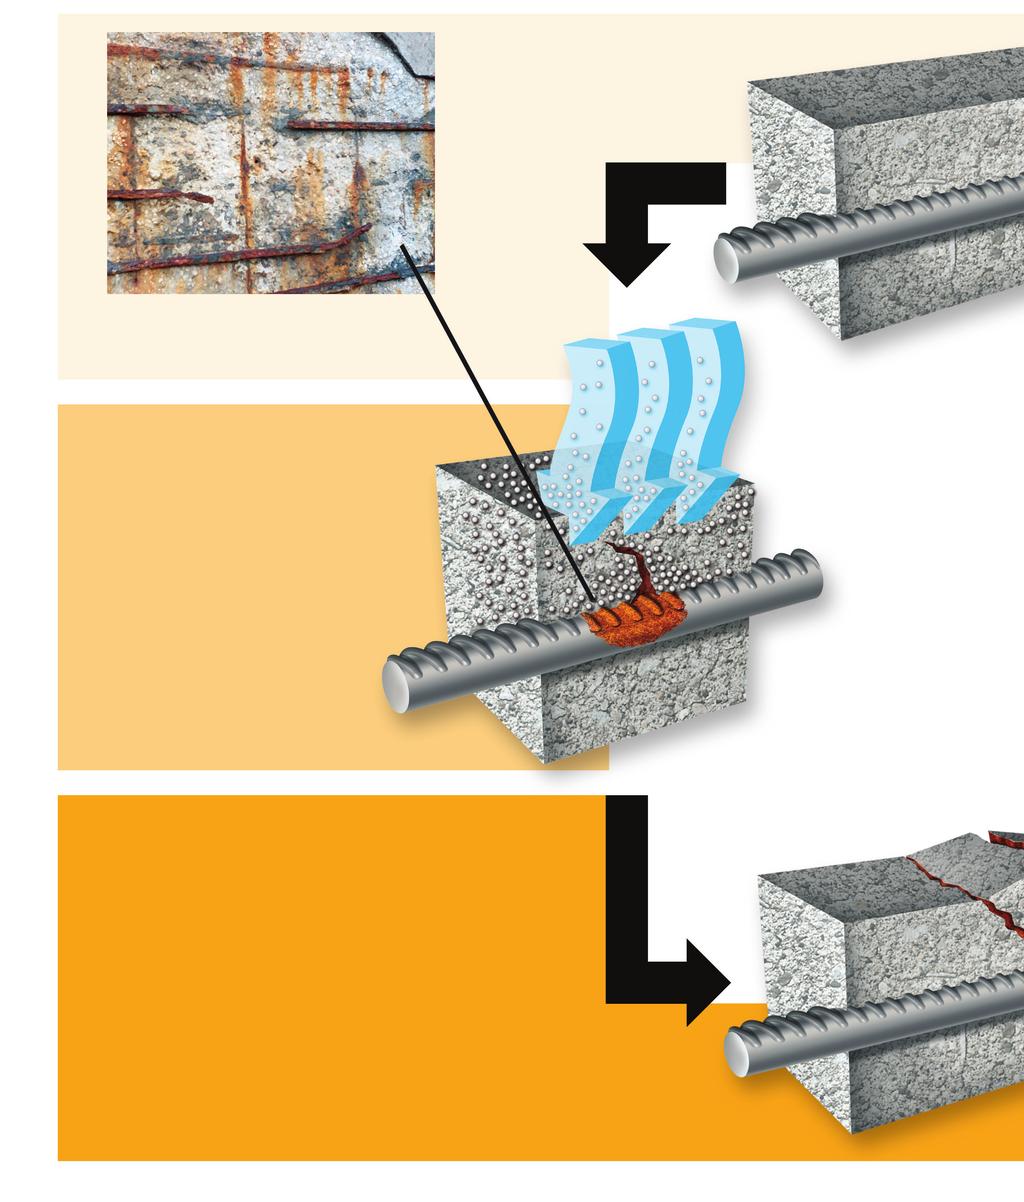 THE ROOT CAUSES OF CORROSION CHLORIDES Chlorides accumulate near the concrete surface due to wetting and drying effects, then diffuse towards the reinforcement.